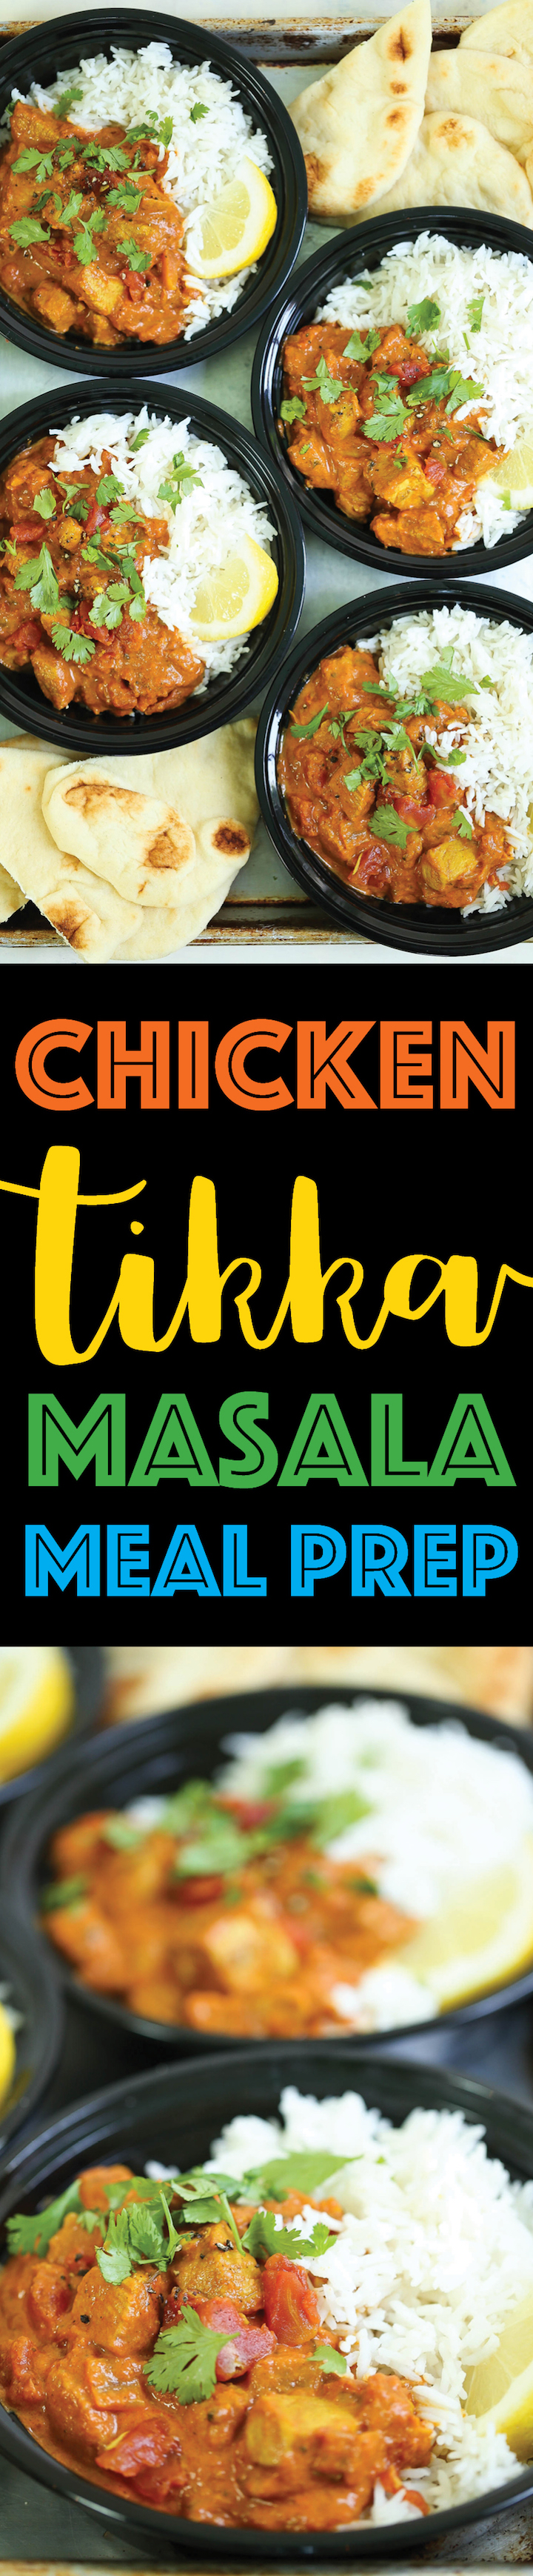 Chicken Tikka Masala Meal Prep - Everyone's FAVORITE chicken tikka masala bowls made from scratch in just 30 min! And you can prep for the entire week!!!